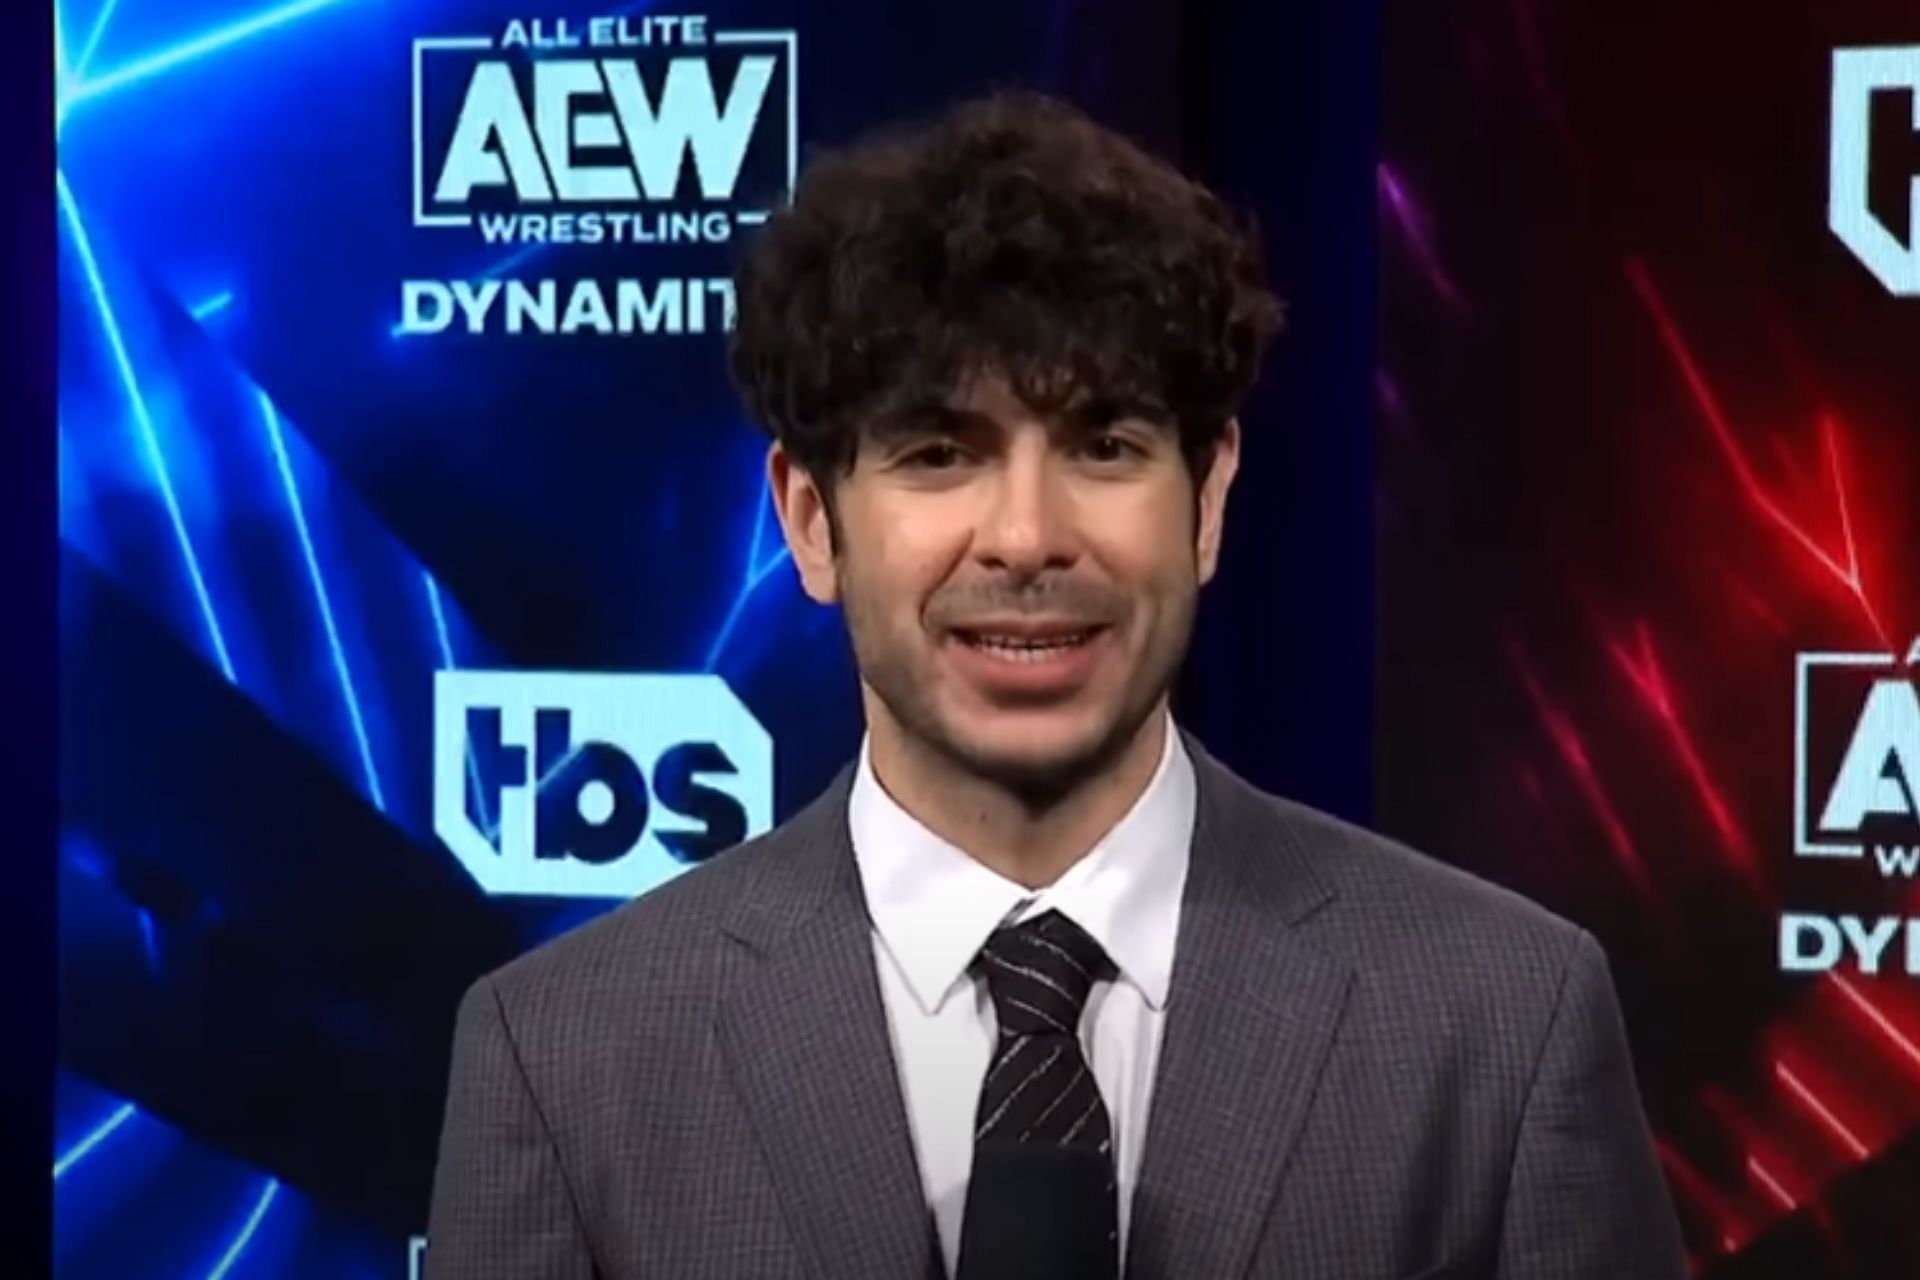 Tony Khan could be up to commit a grave mistake [Image Courtesy: AEW Youtube]